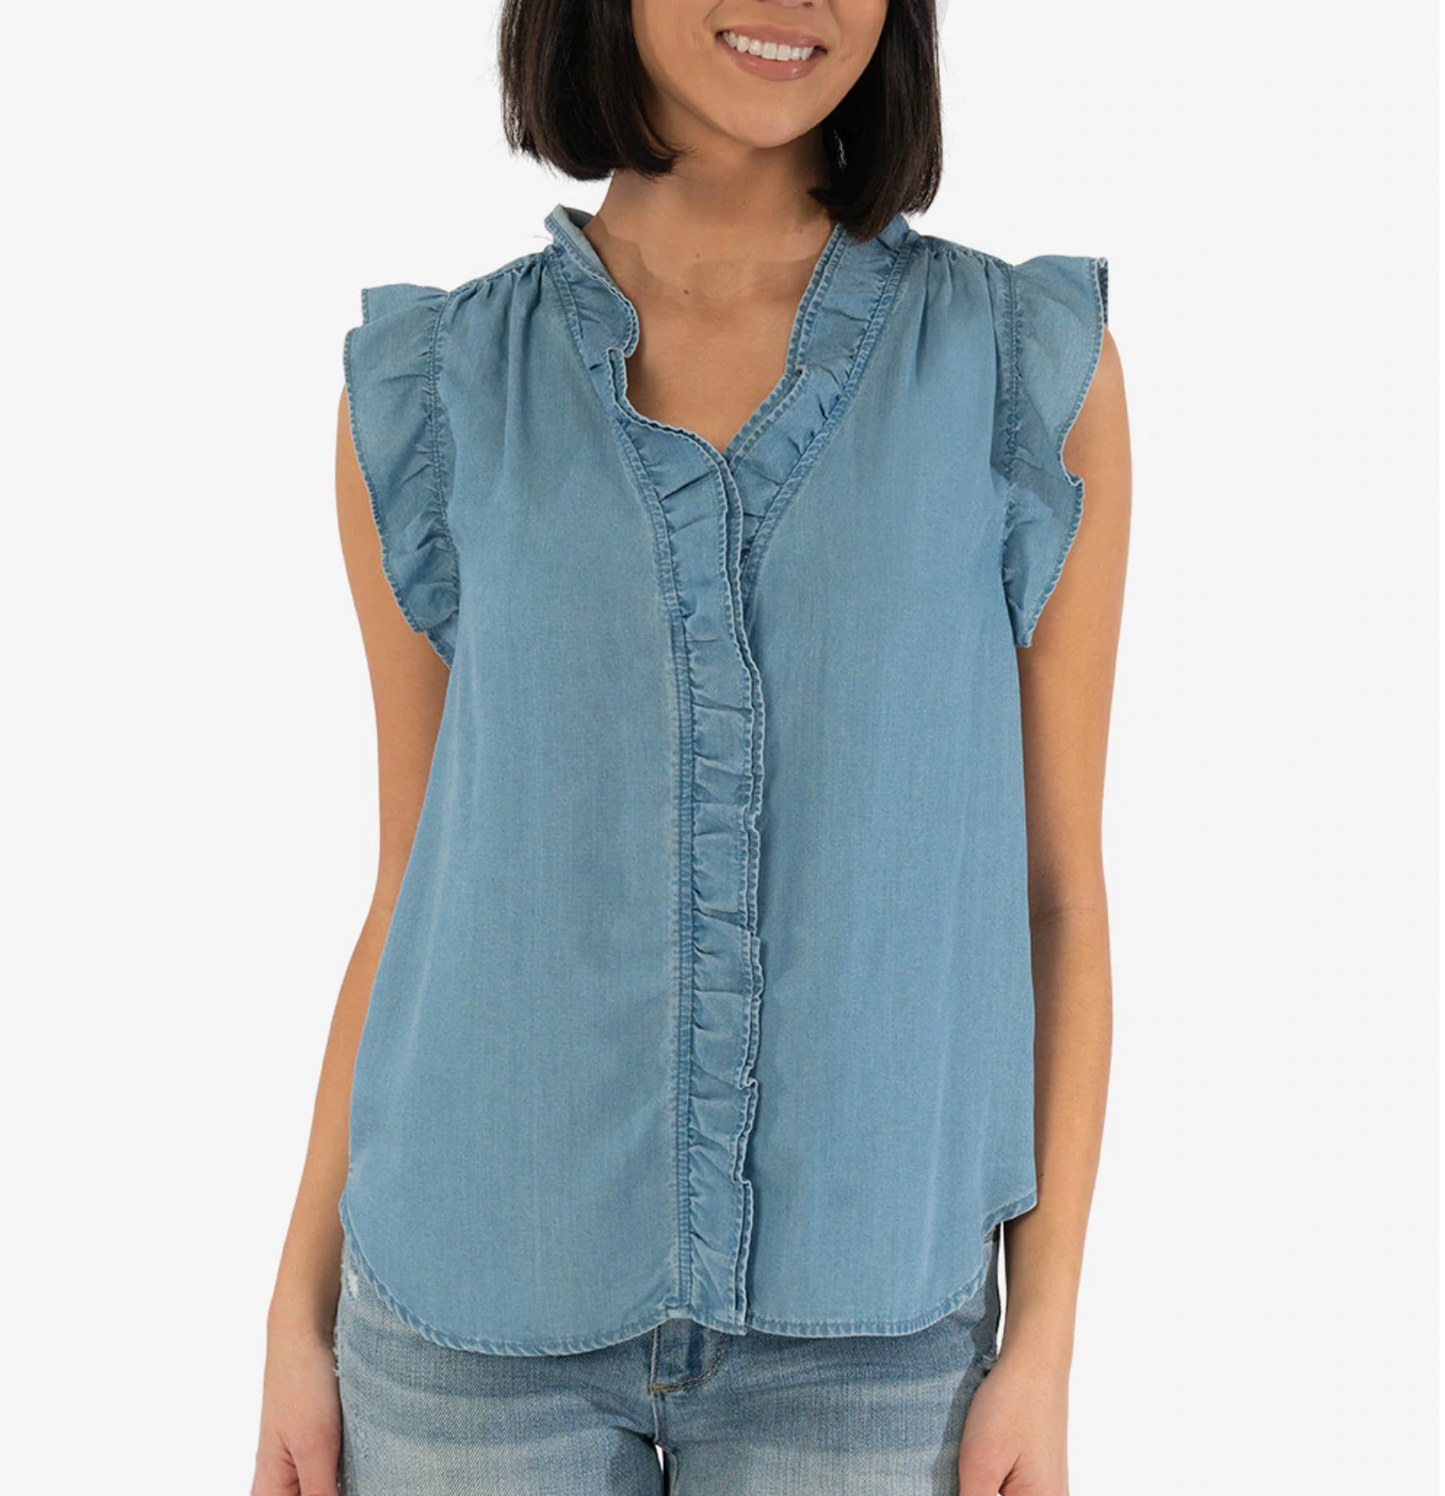 Kut from the Kloth- Ruffle Tencel Blouse in Med Wash